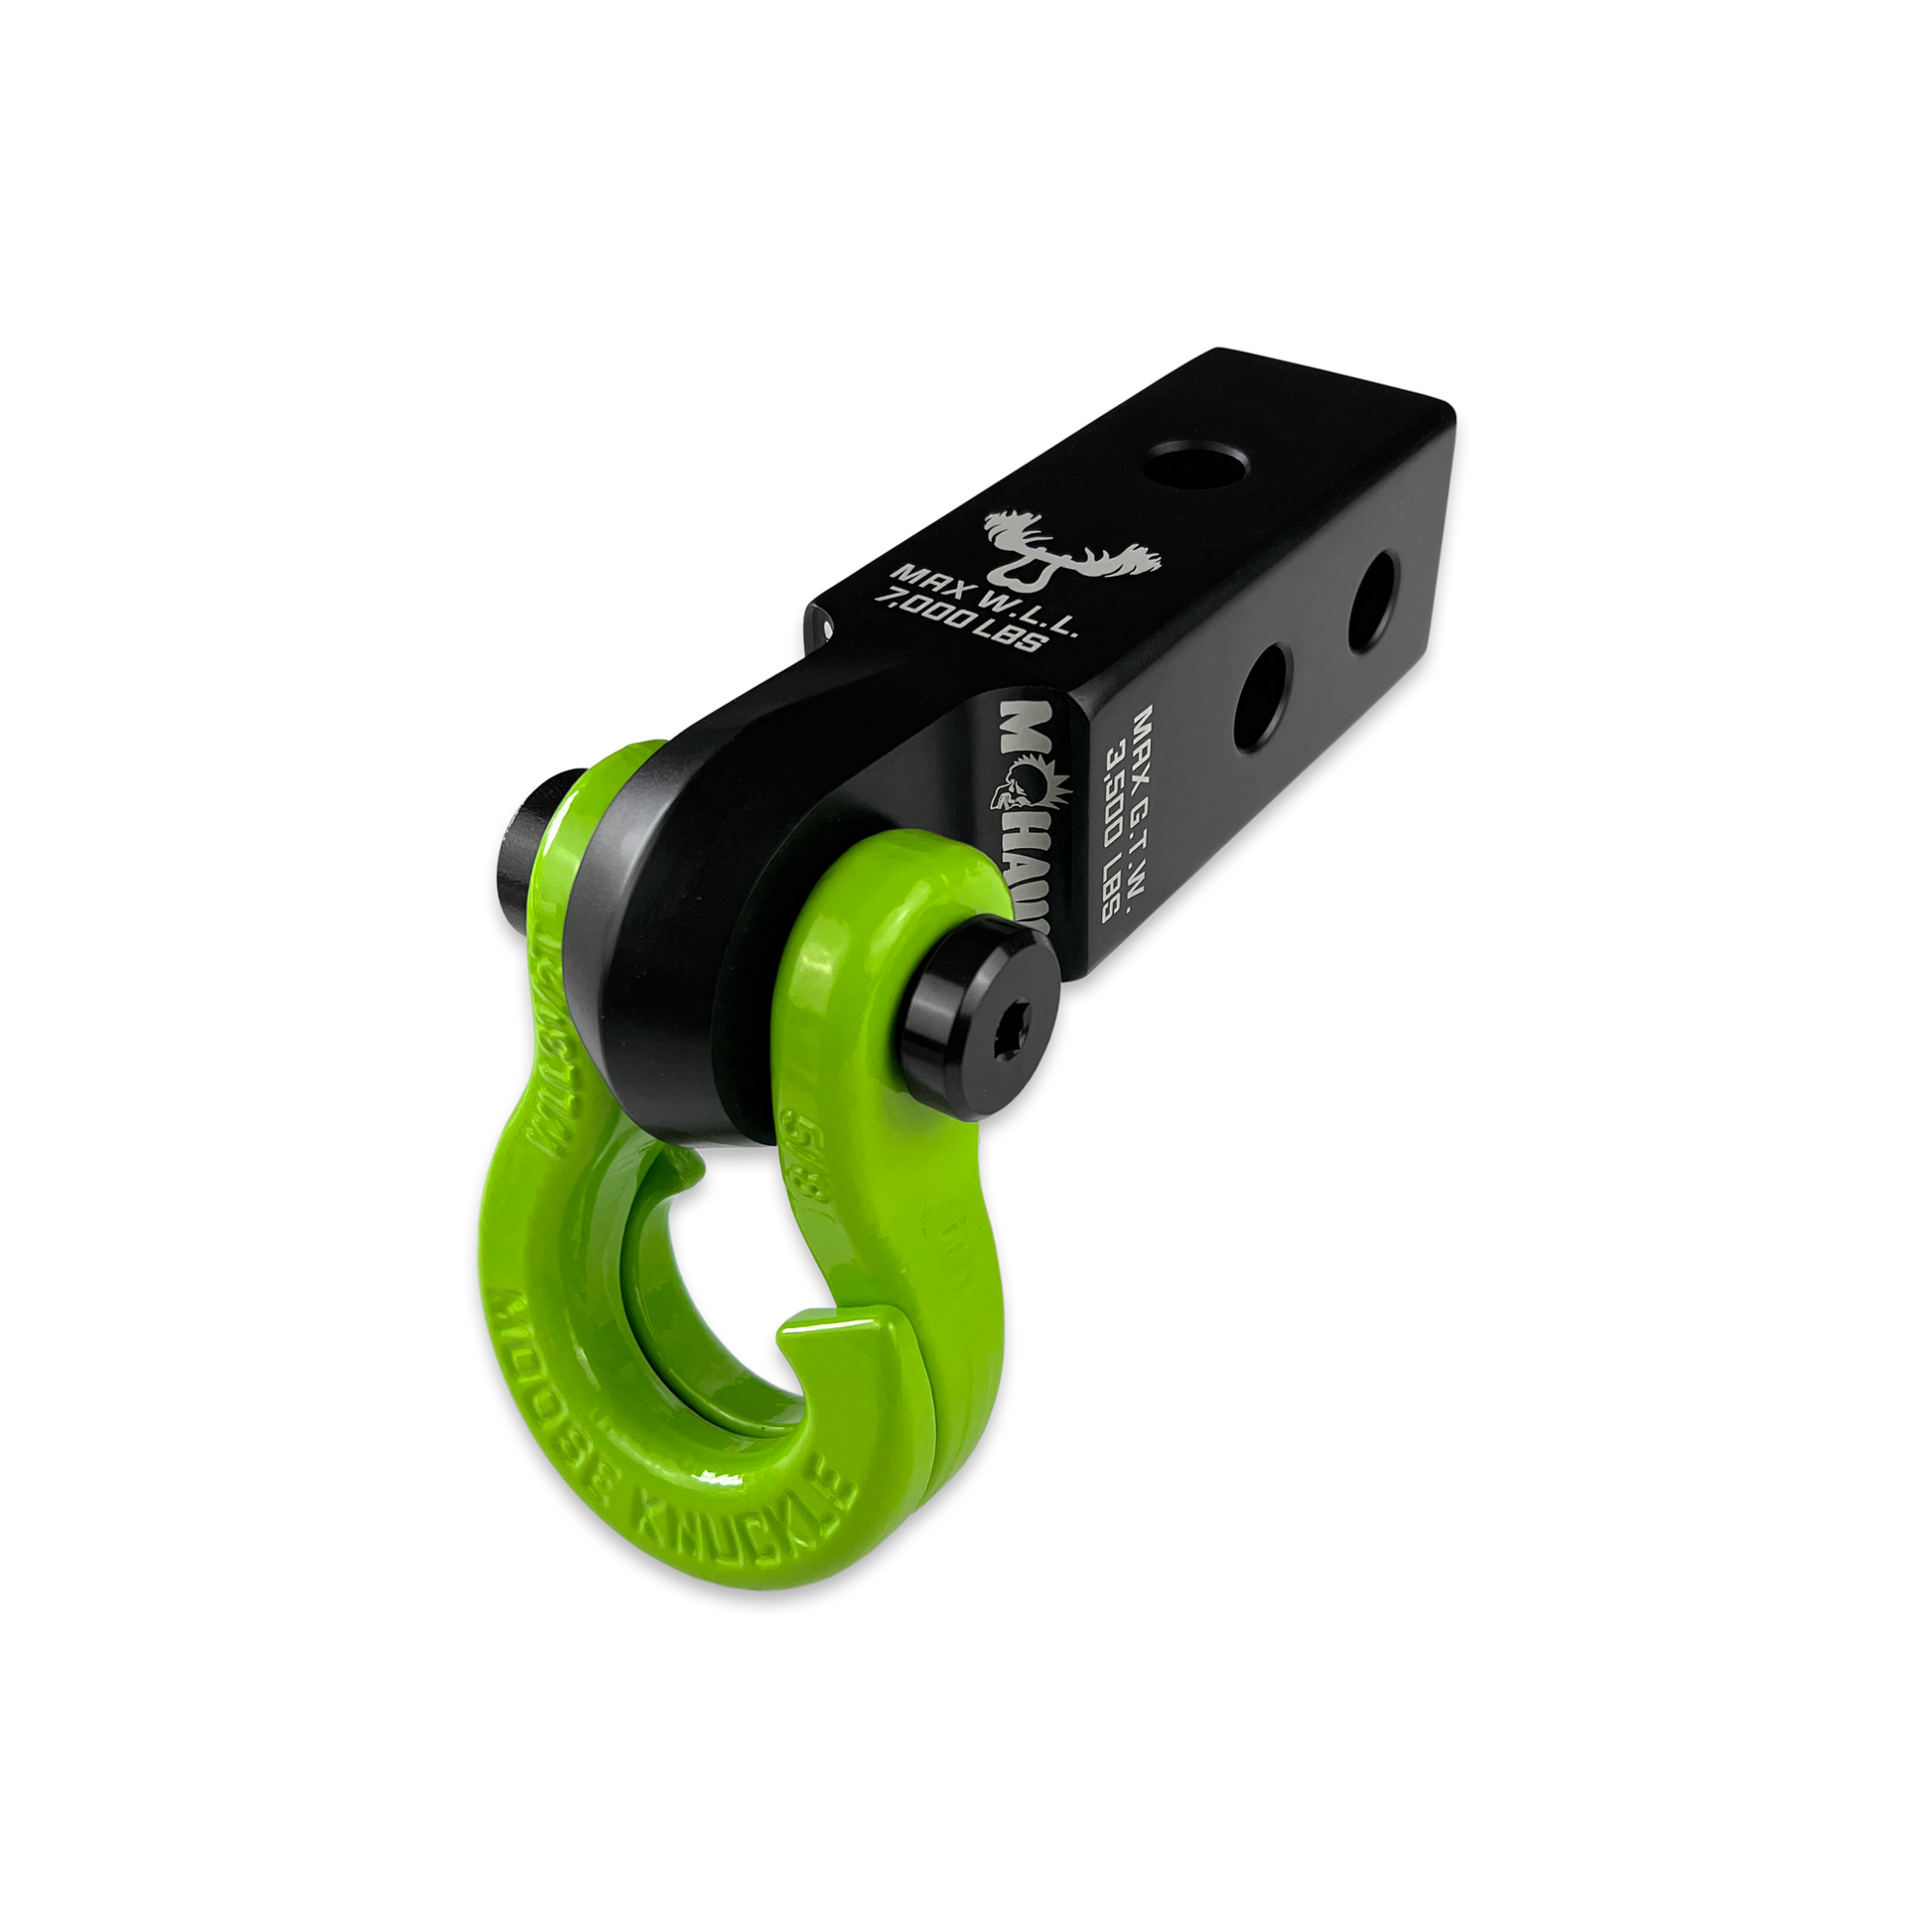 Jowl 5/8 Split Shackle & Mohawk 2.0 X 5/8 Receiver (Black Lung and Sublime Green)